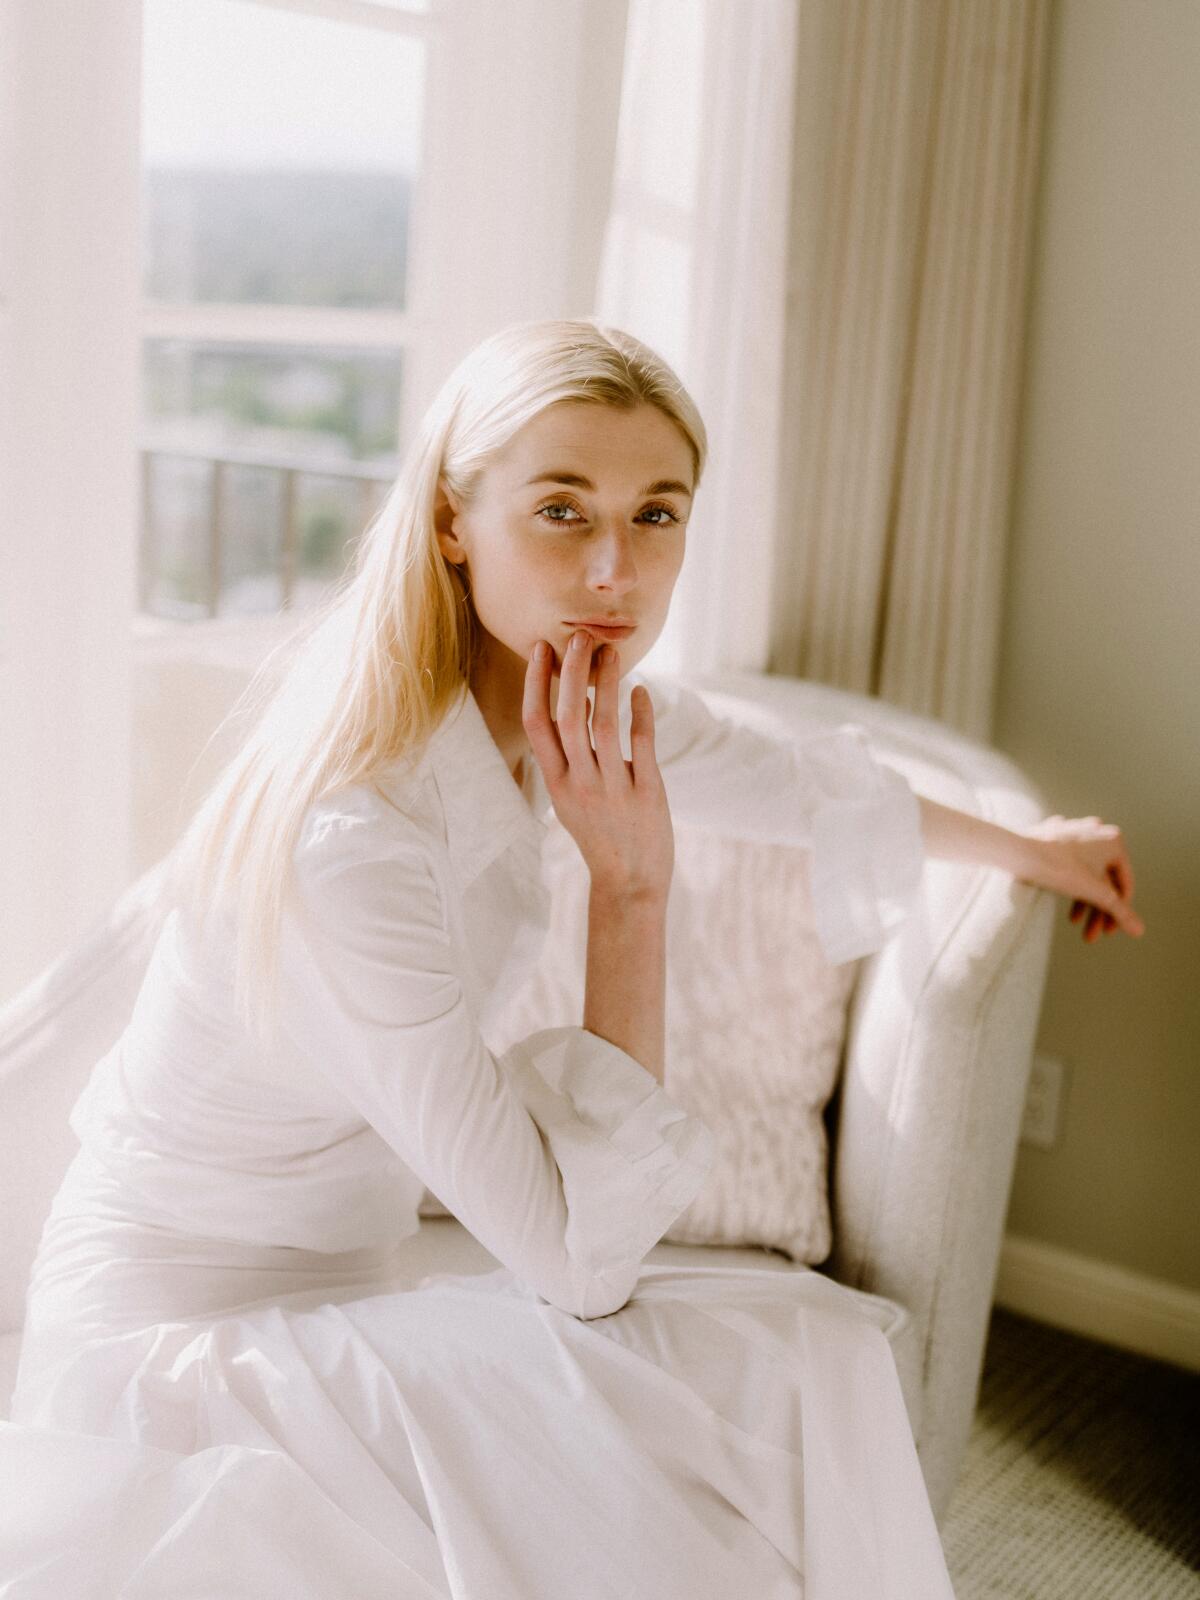 Elizabeth Debicki wears a white dress and sits in a white chair for a portrait.